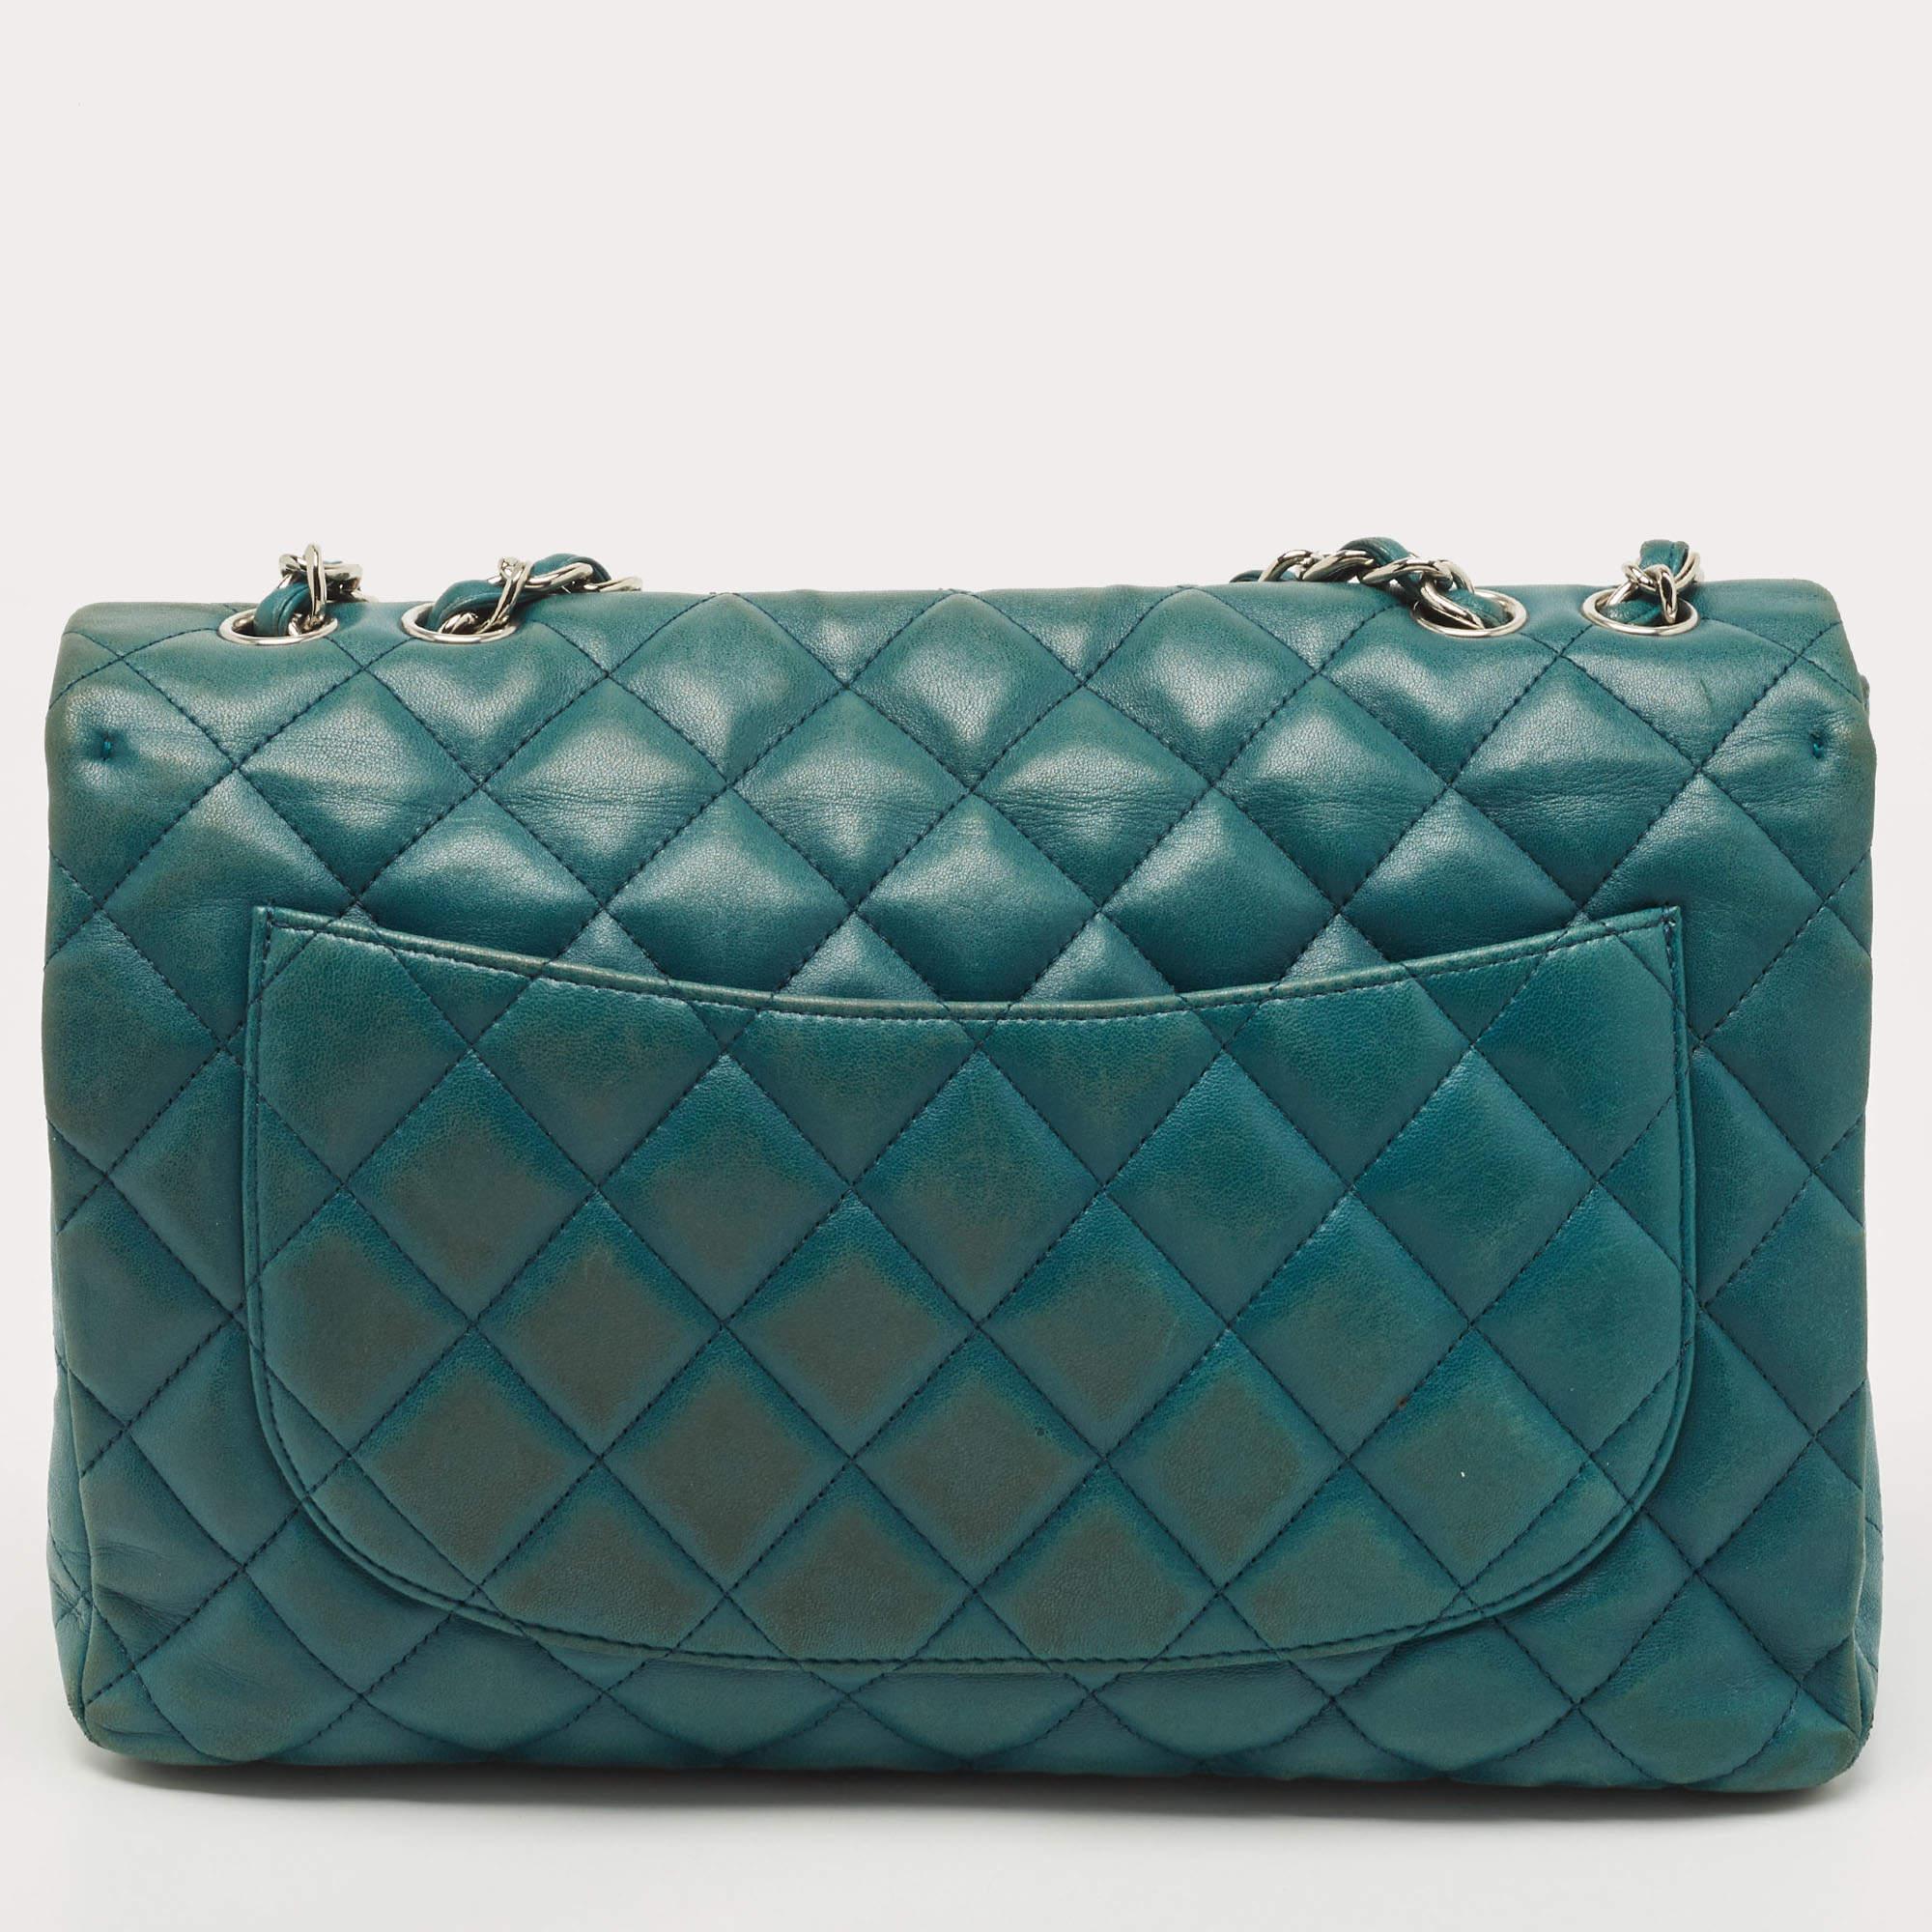 Chanel Teal Green Quilted Leather Jumbo Classic Single Flap Bag 7